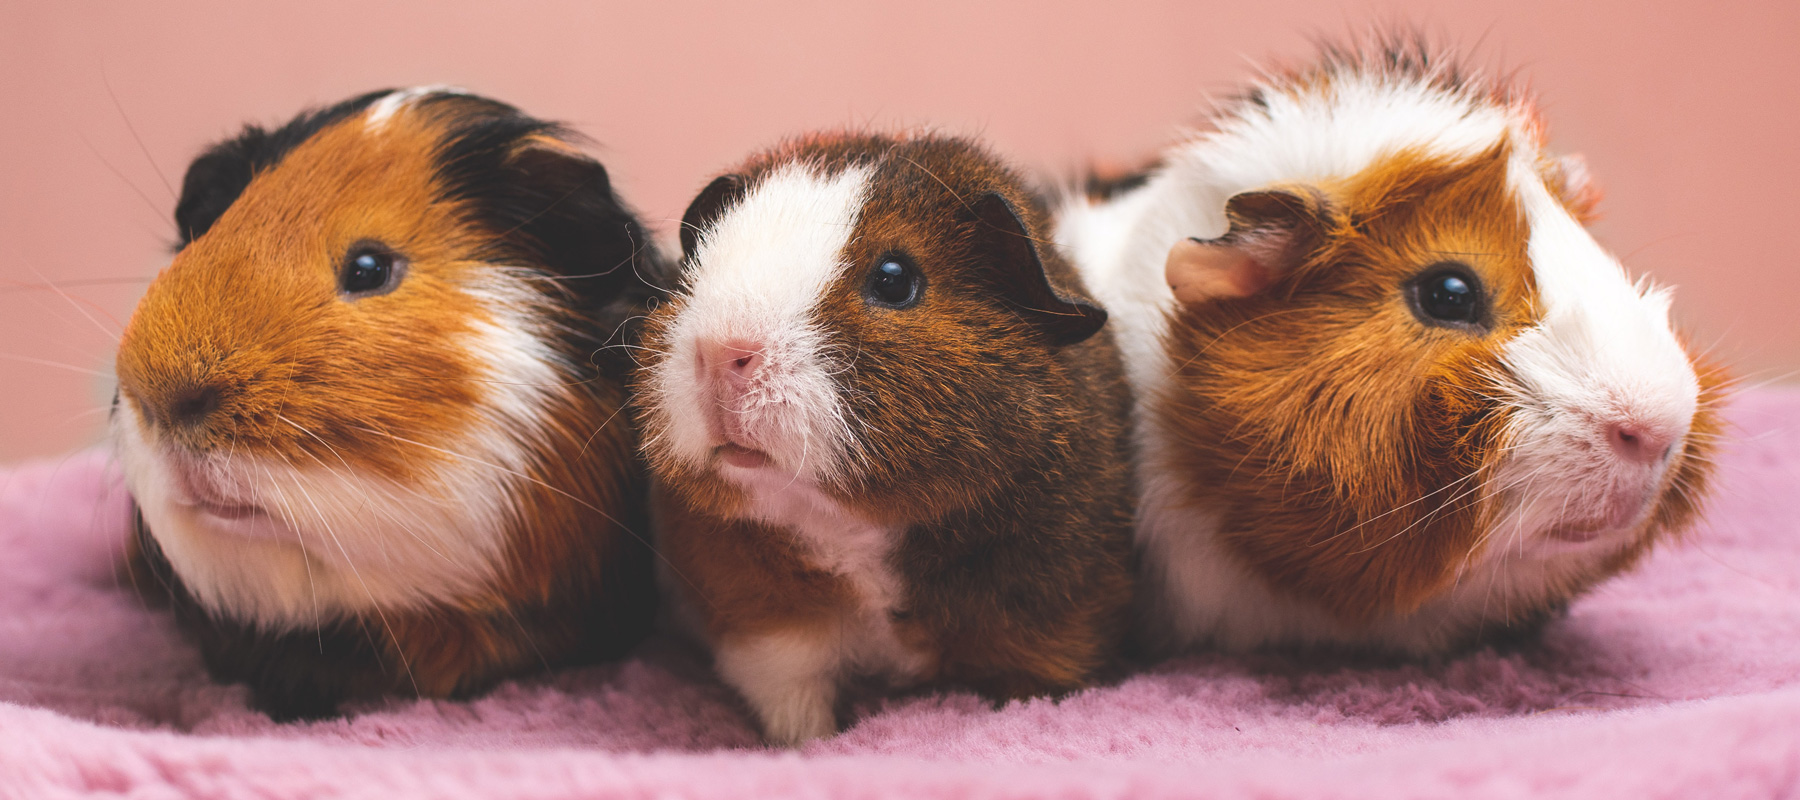 <h3>Mammiferi</h3>
<p><strong>Guinea pig</strong></p>
<div id="gtx-trans" style="position: absolute; left: -20px; top: 13.2px;"> </div>